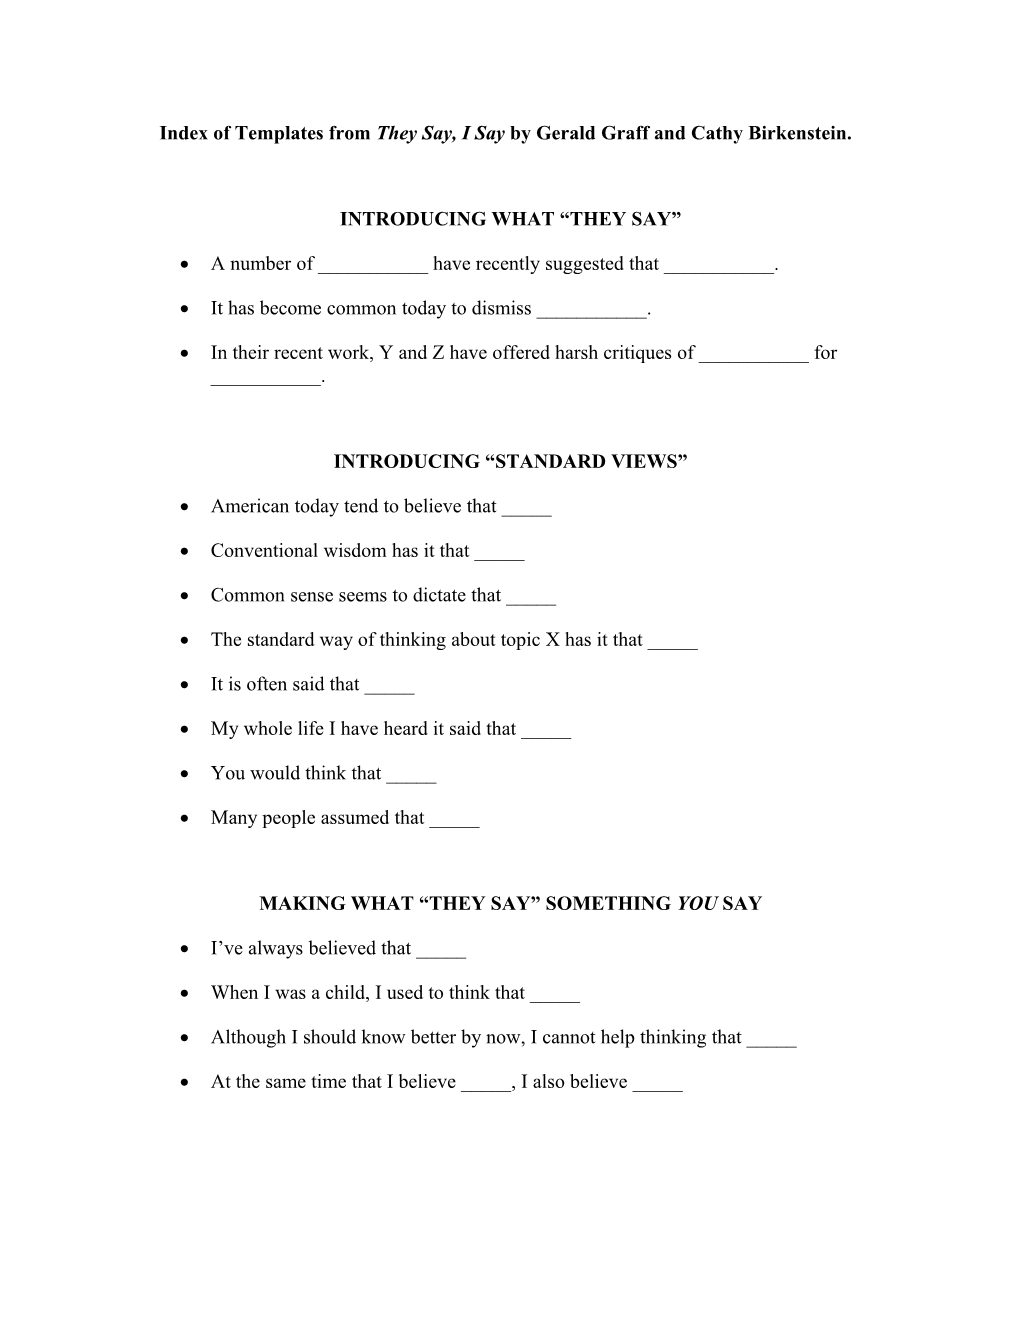 Index of Templates from They Say, I Say by Gerald Graff and Cathy Birkenstein s1